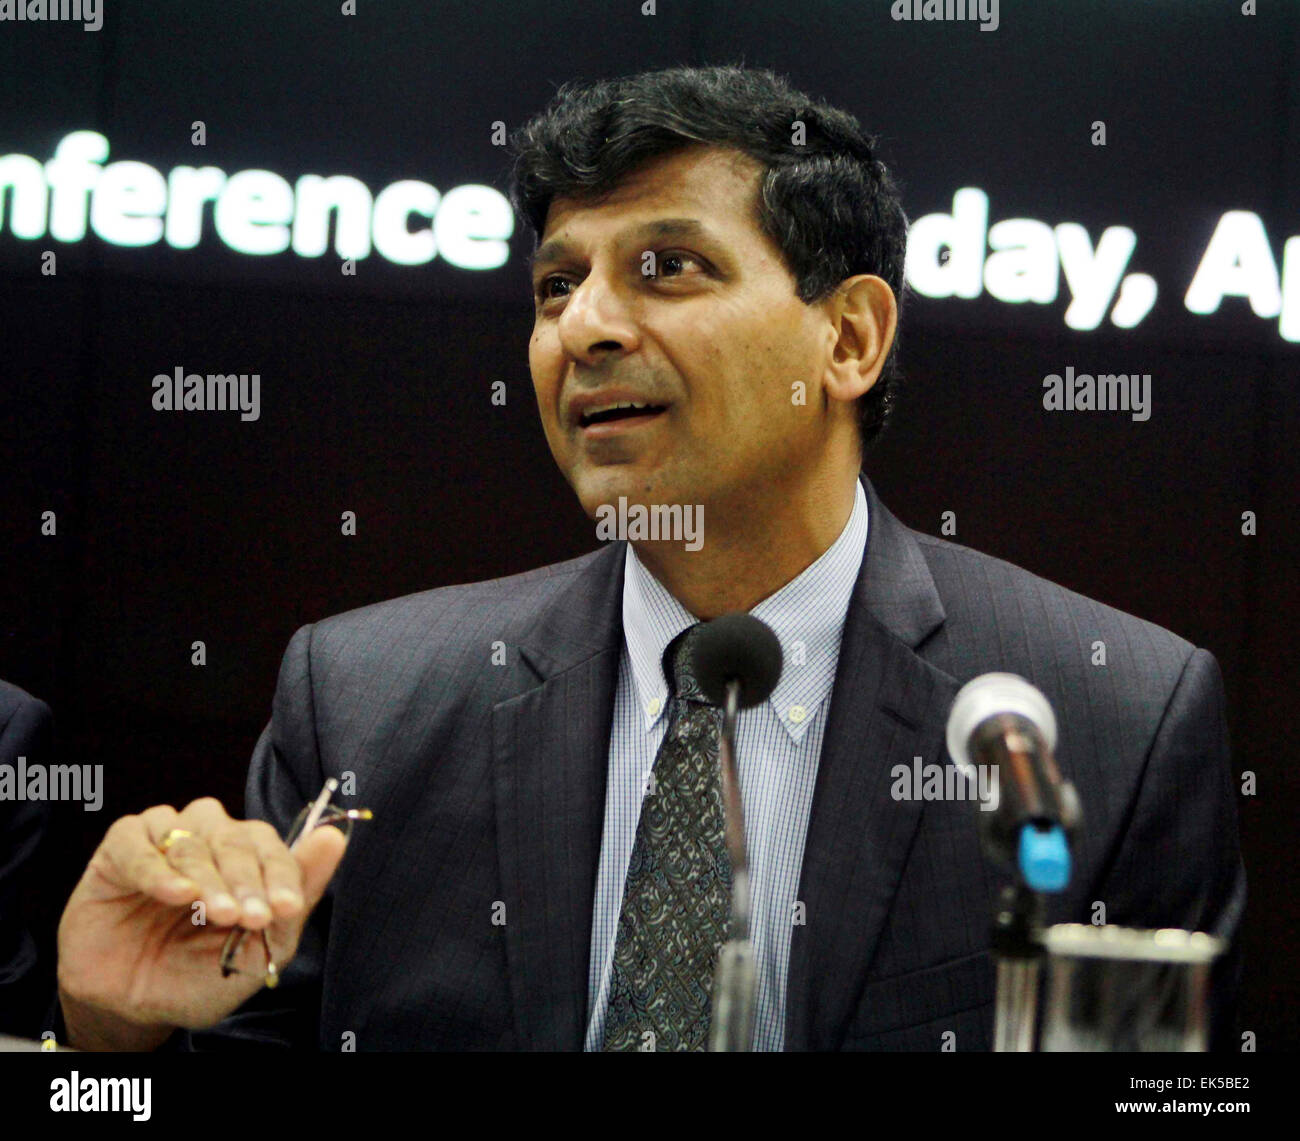 Mumbai, India. 7th Apr, 2015. Reserve Bank of India (RBI) Governor Raghuram Rajan attends a press conference after the first bi-monthly review of the monetary policy for the current fiscal year in Mumbai, India, April 7, 2015. RBI chief Raghuram Rajan Tuesday flayed the banks for not passing on the benefits of lower interest rates to consumers. Credit:  Stringer/Xinhua/Alamy Live News Stock Photo